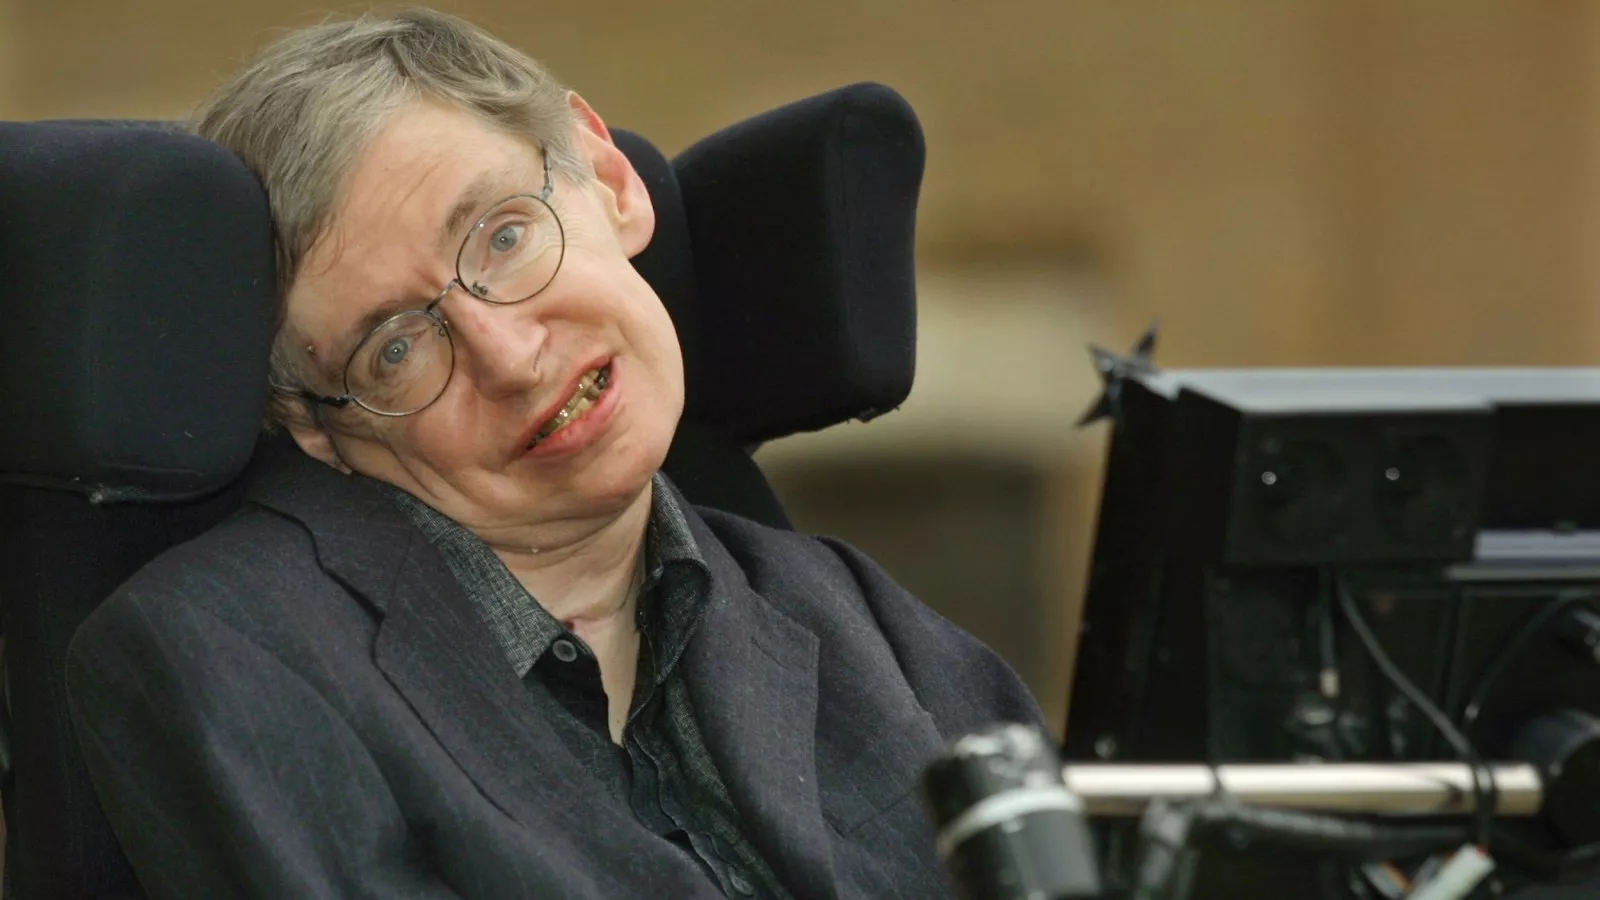 Stephen Hawking Named in Epstein Files as Court Asks For Photos, Videos  With Virginia Giuffre